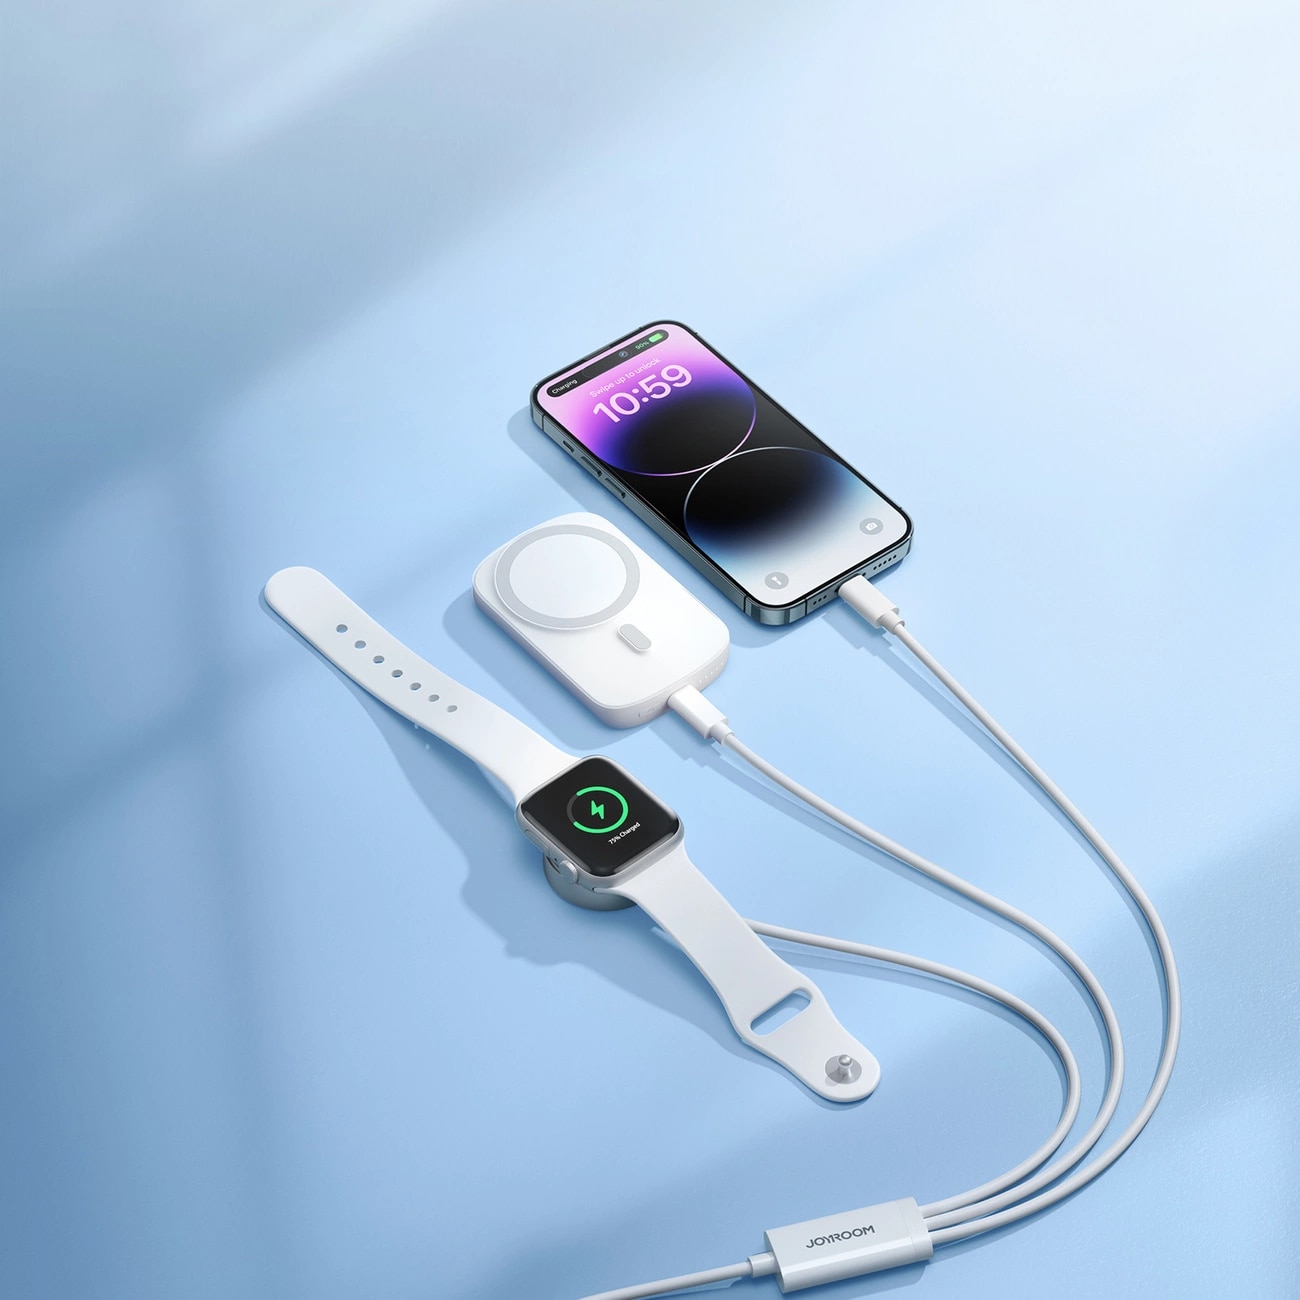 Câble 3-in-1 USB-A -> USB-C/Lightning + Chargeur Apple Watch, blanc (S-IW008)